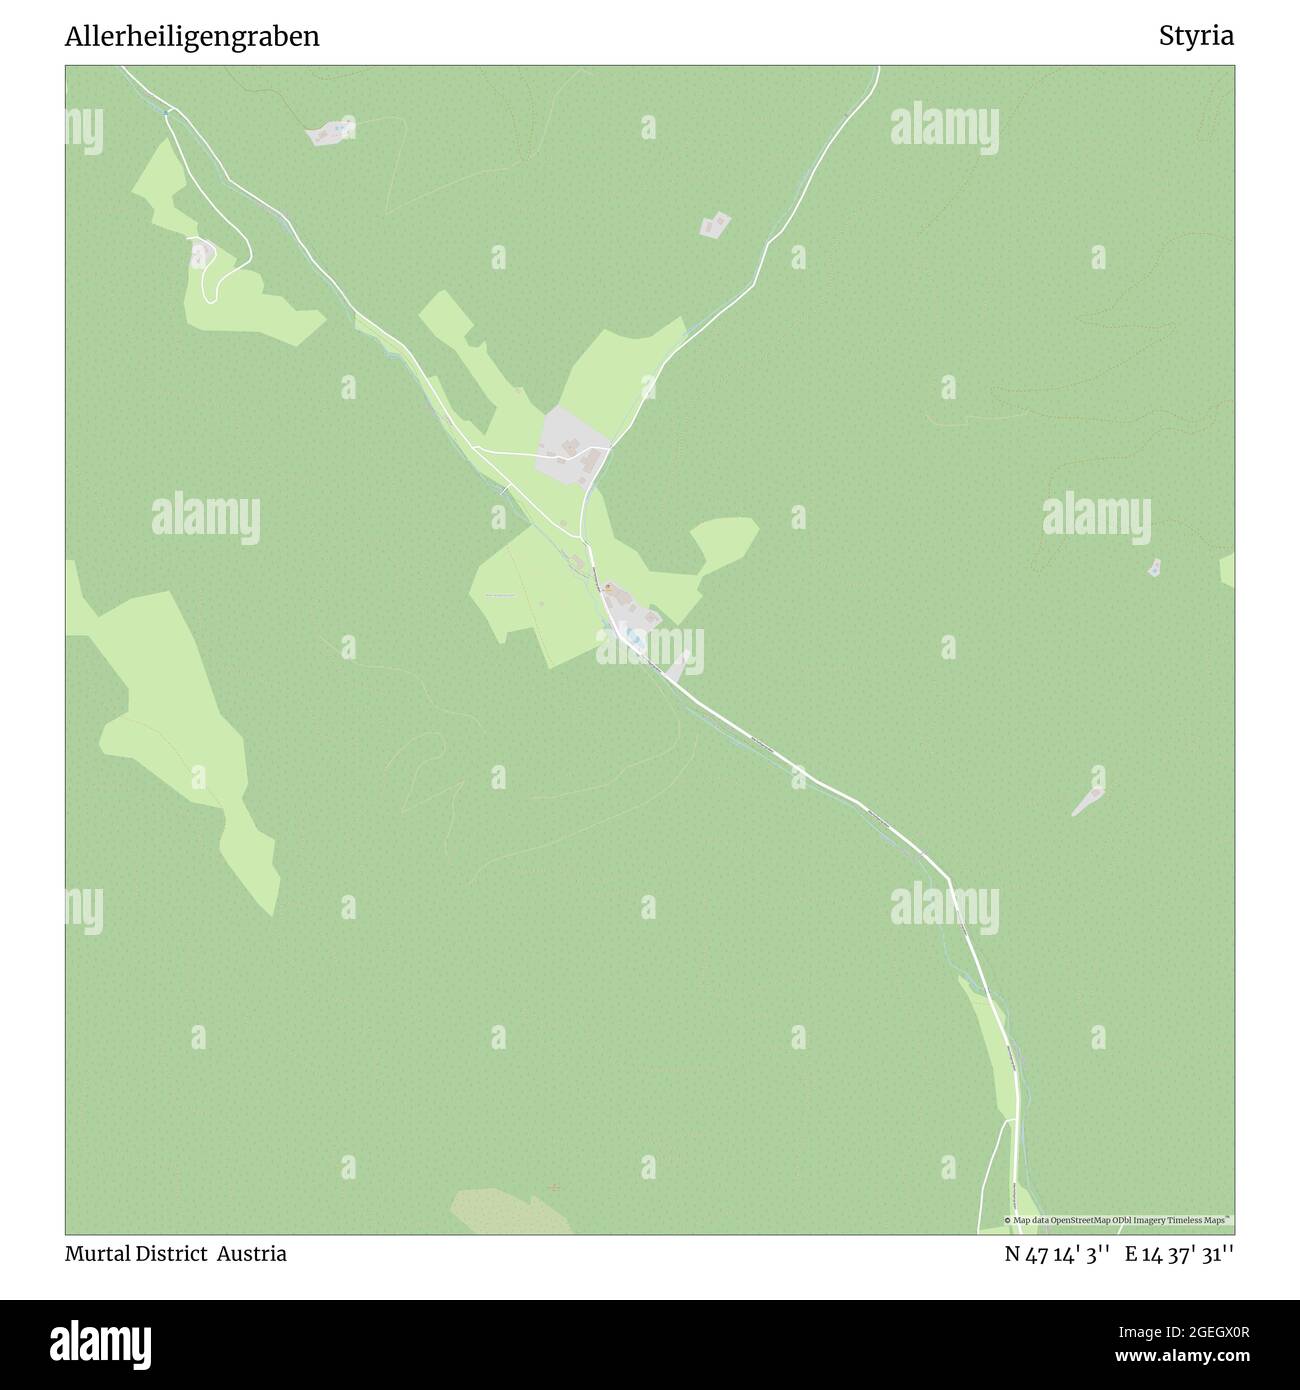 Allerheiligengraben, Murtal District, Austria, Styria, N 47 14' 3'', E 14 37' 31'', map, Timeless Map published in 2021. Travelers, explorers and adventurers like Florence Nightingale, David Livingstone, Ernest Shackleton, Lewis and Clark and Sherlock Holmes relied on maps to plan travels to the world's most remote corners, Timeless Maps is mapping most locations on the globe, showing the achievement of great dreams Stock Photo